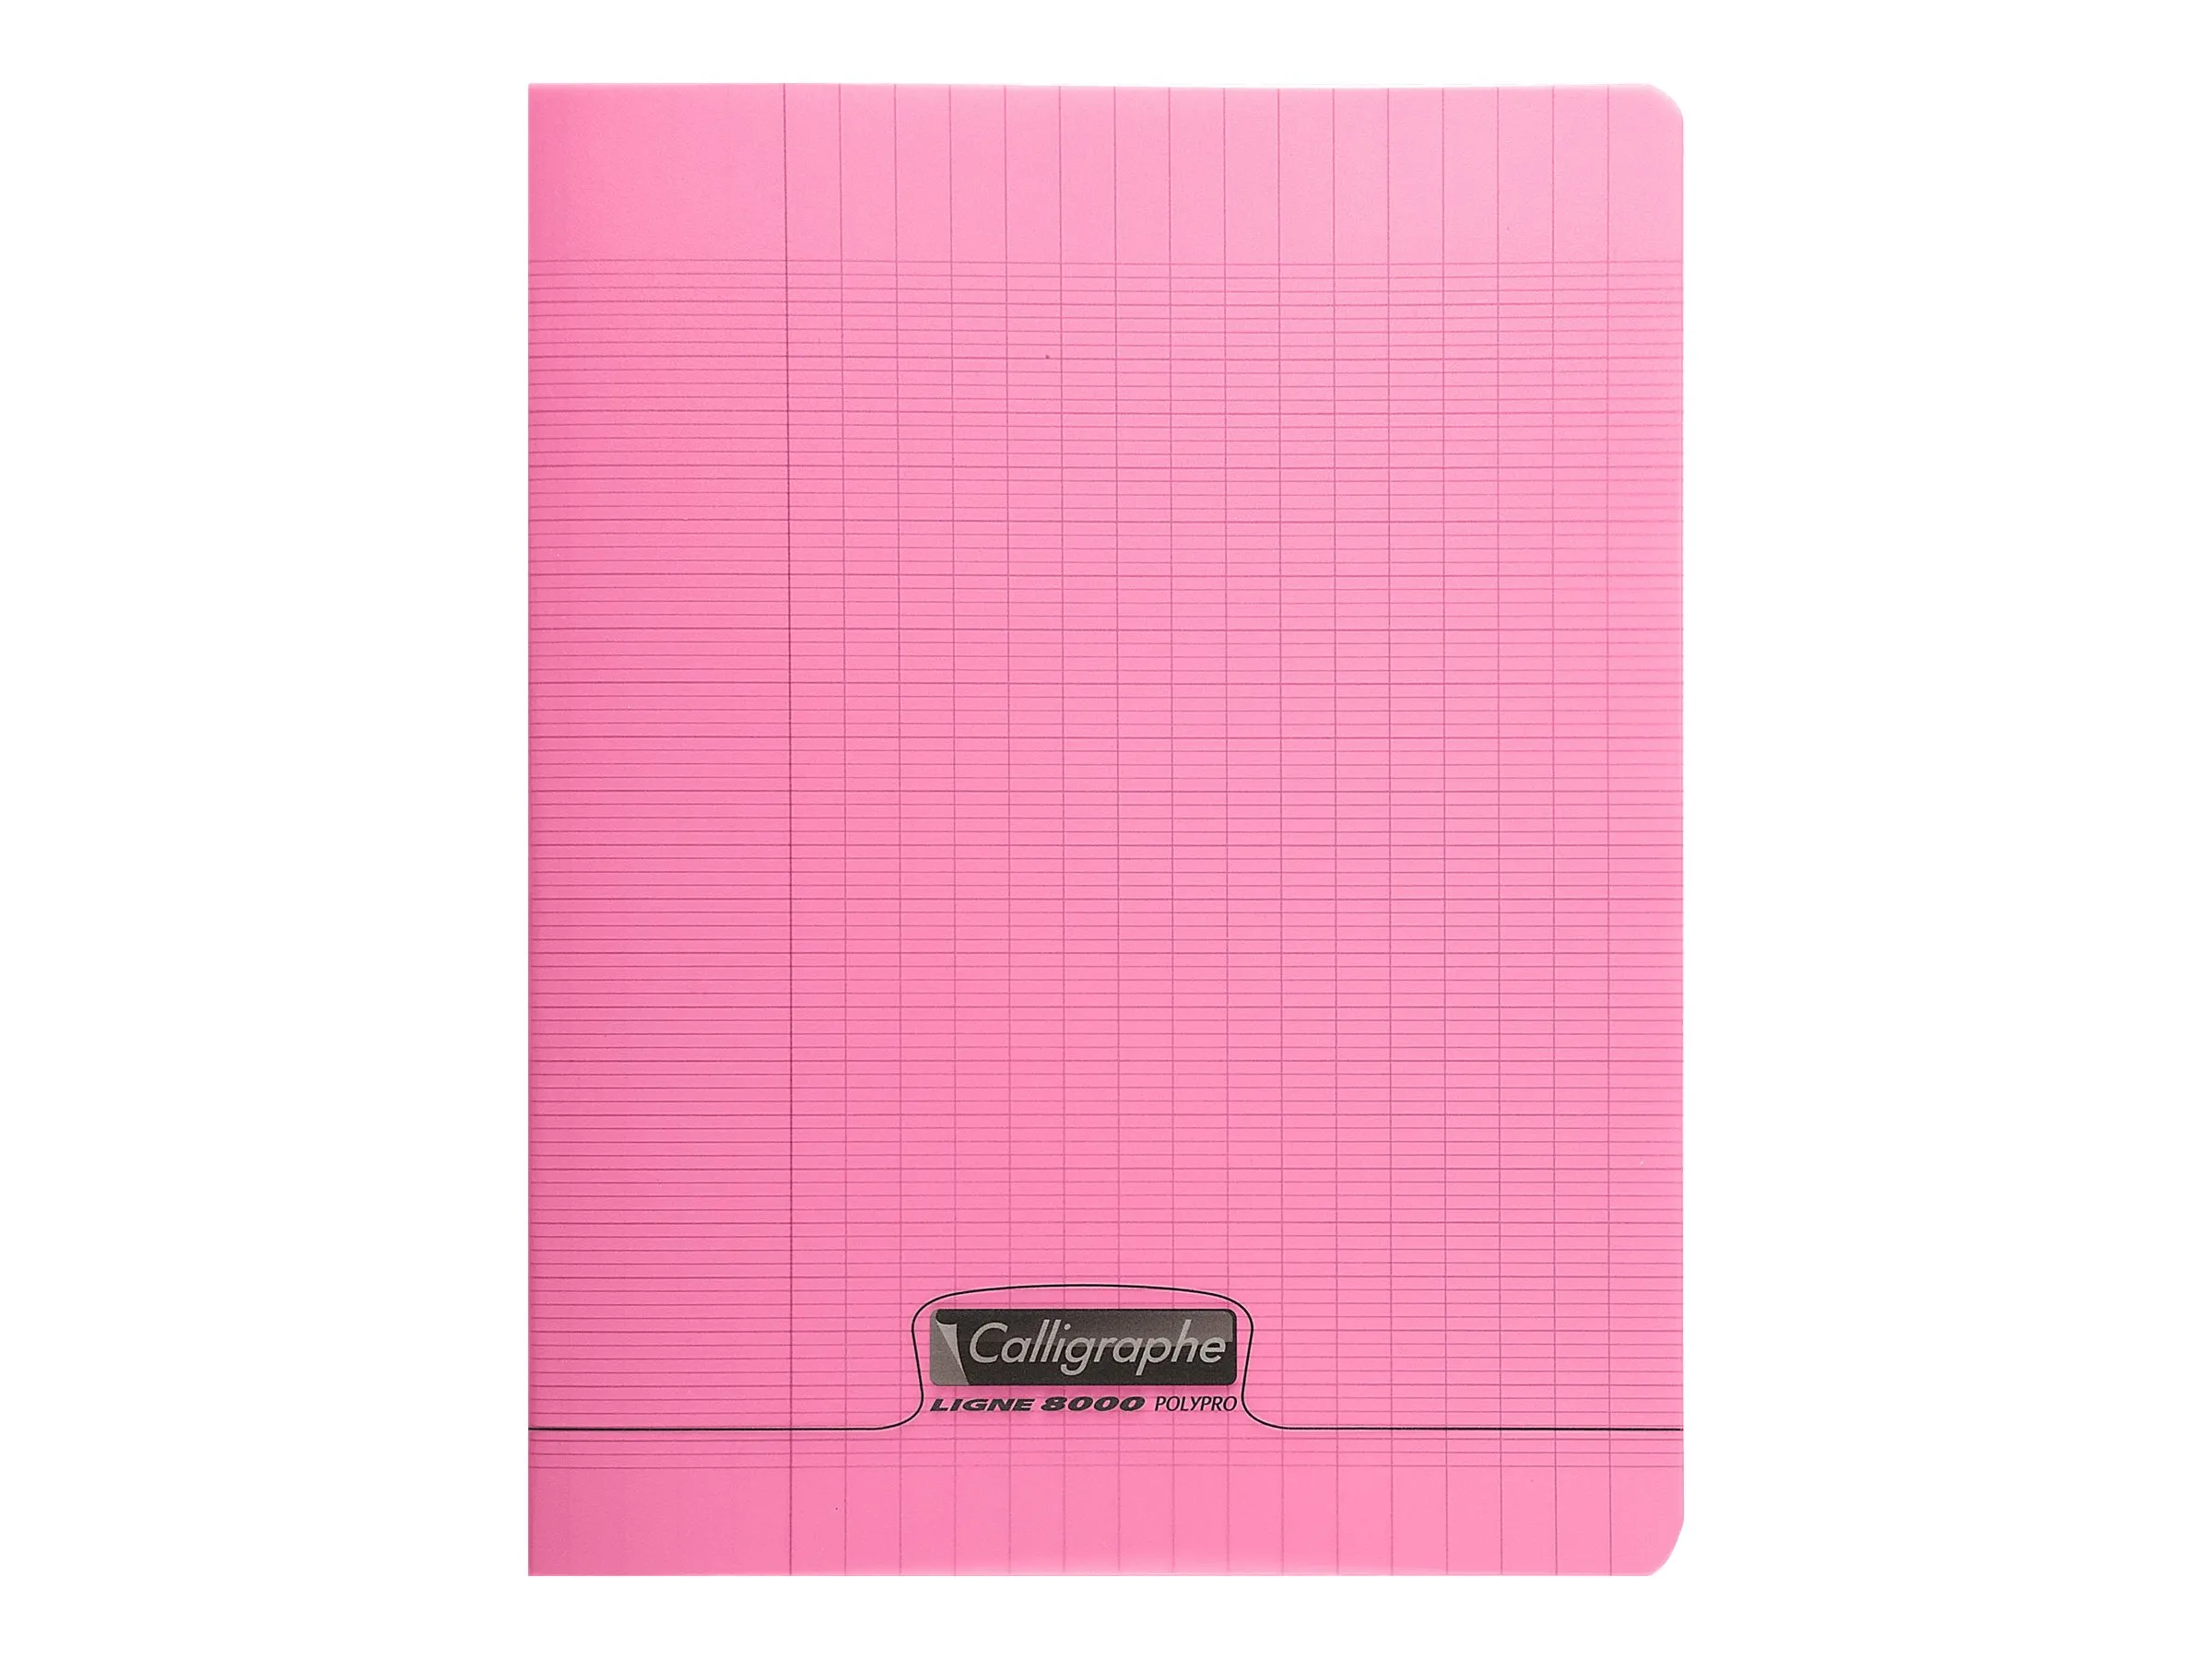 Calligraphe 8000 - Cahier polypro 24 x 32 cm - 48 pages - grands carreaux  (Seyes) - rose